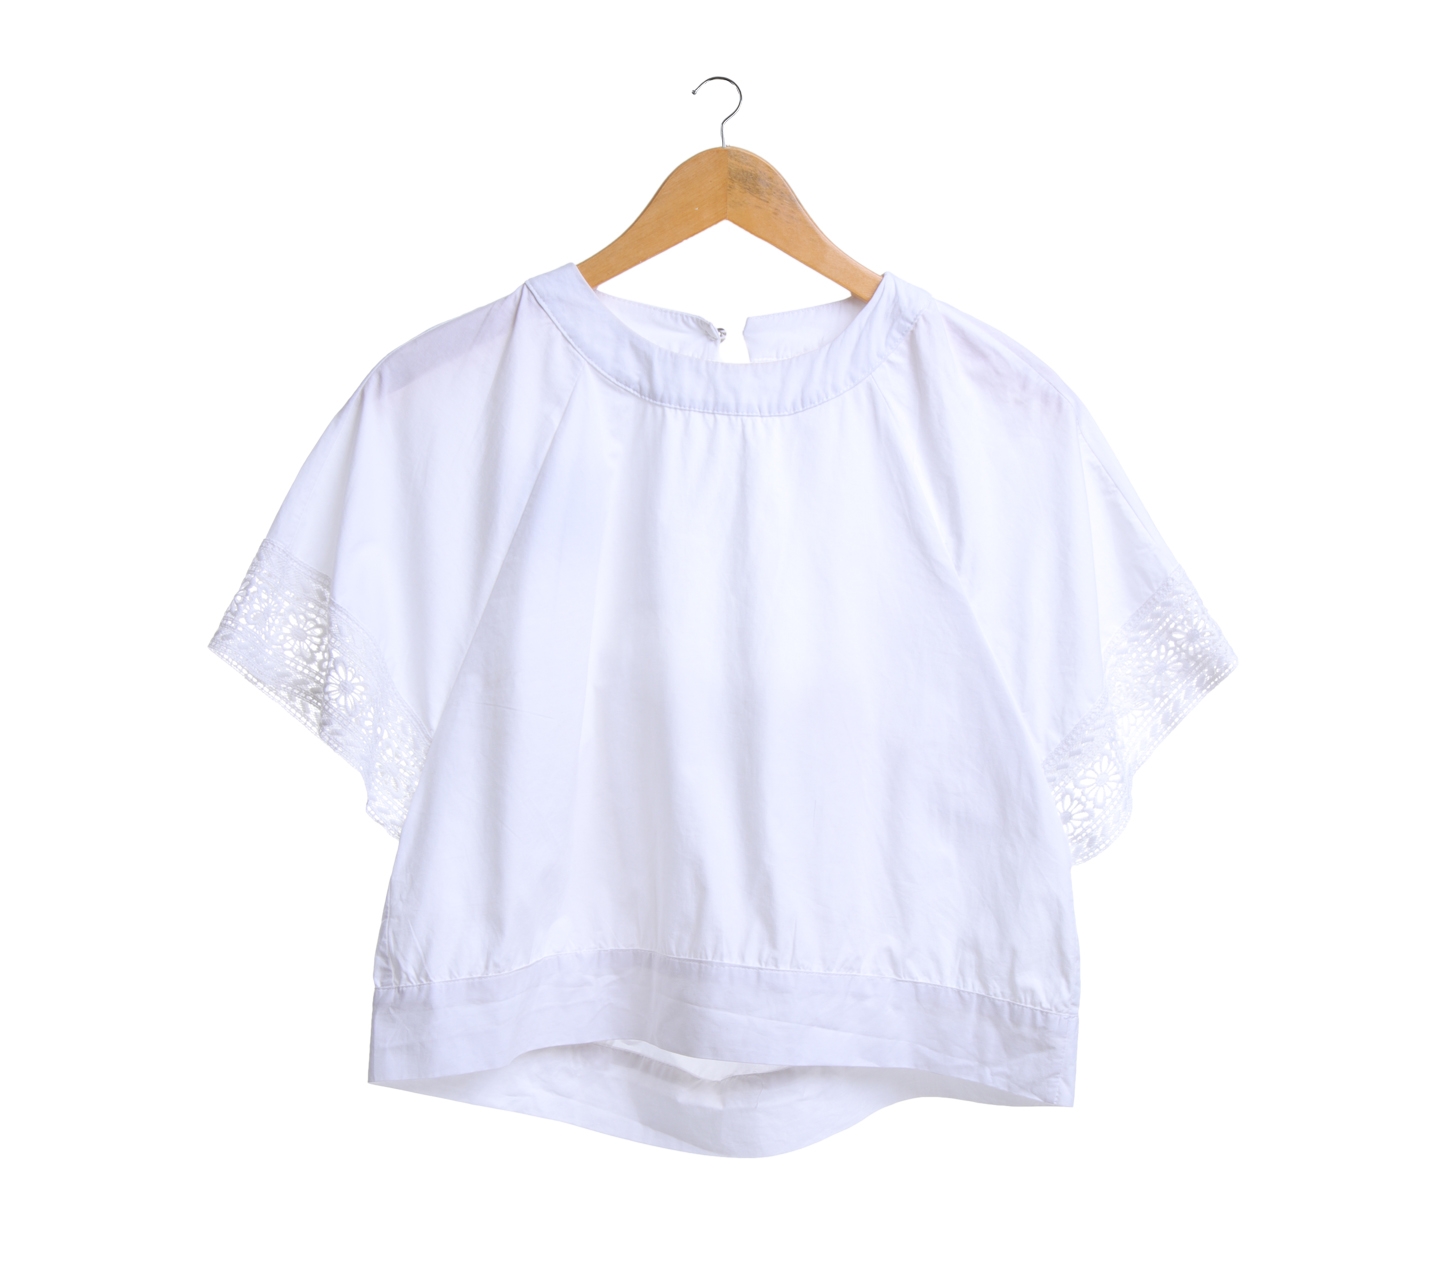 This is April White Crop Top Back Blouse